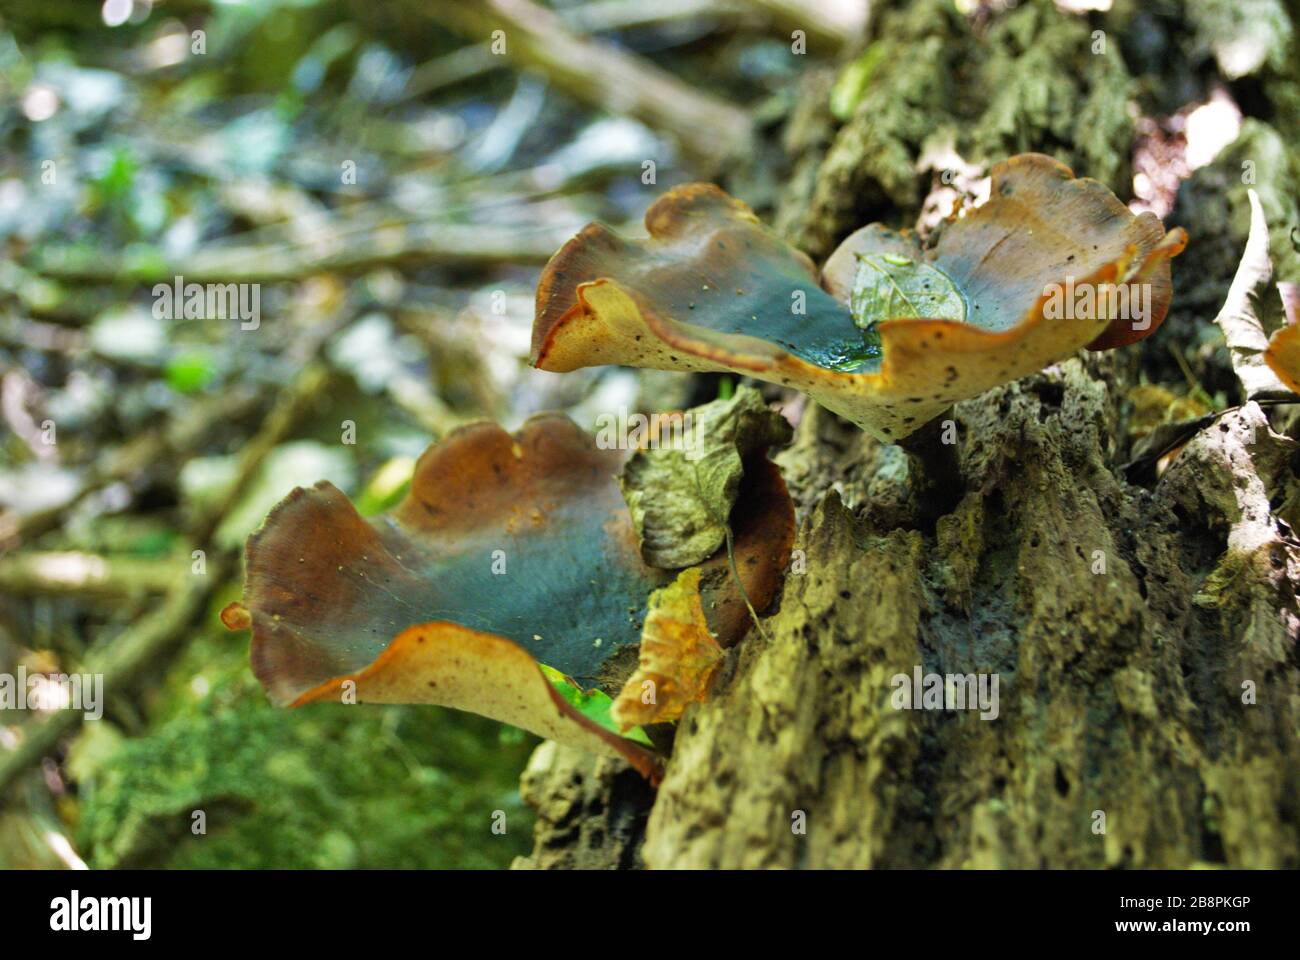 Cup fungus growing on fallen tree in the woods Stock Photo